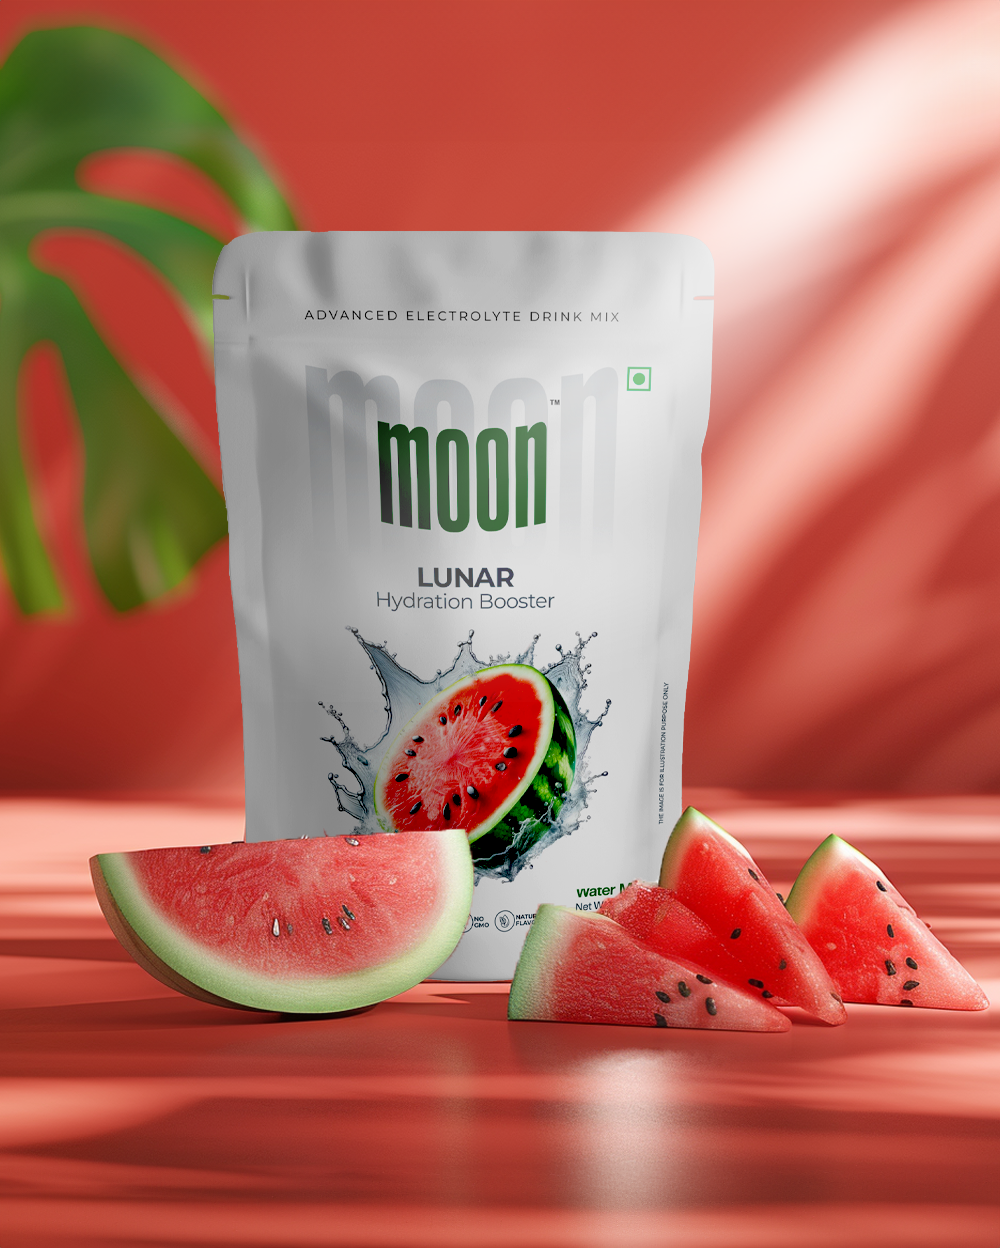 Product description: A bag of Moon Watermelon Lunar Hydration Booster next to a piece of Moon Watermelon.